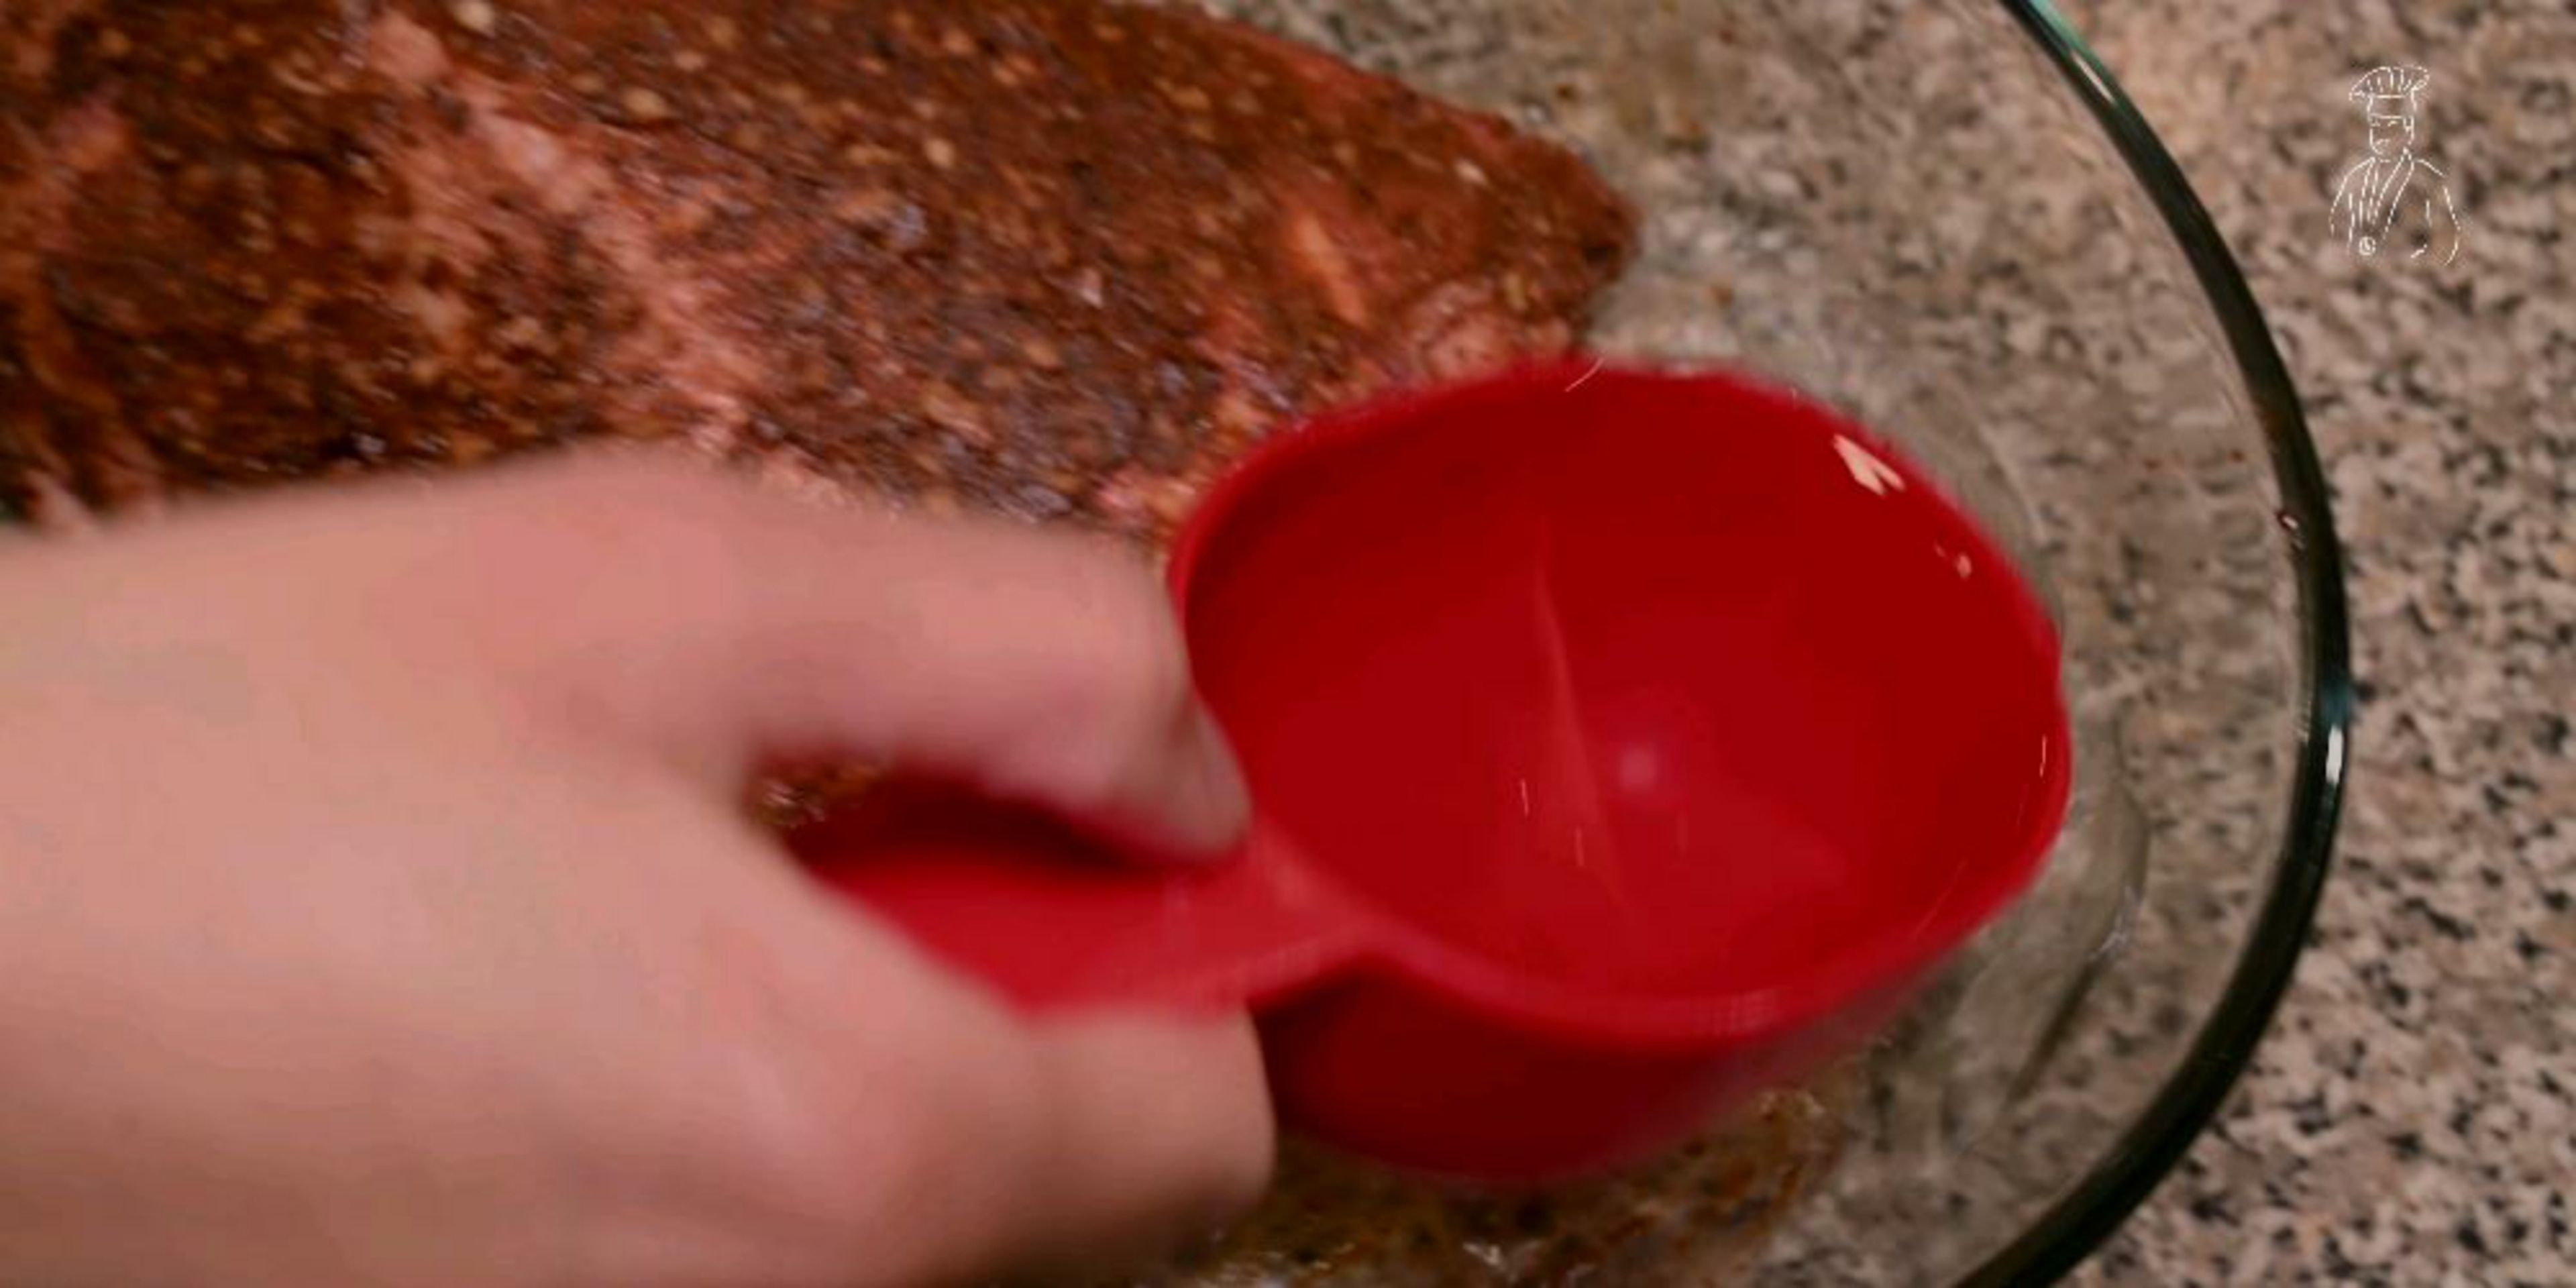 Pour 2 cups of water into the oven dish.